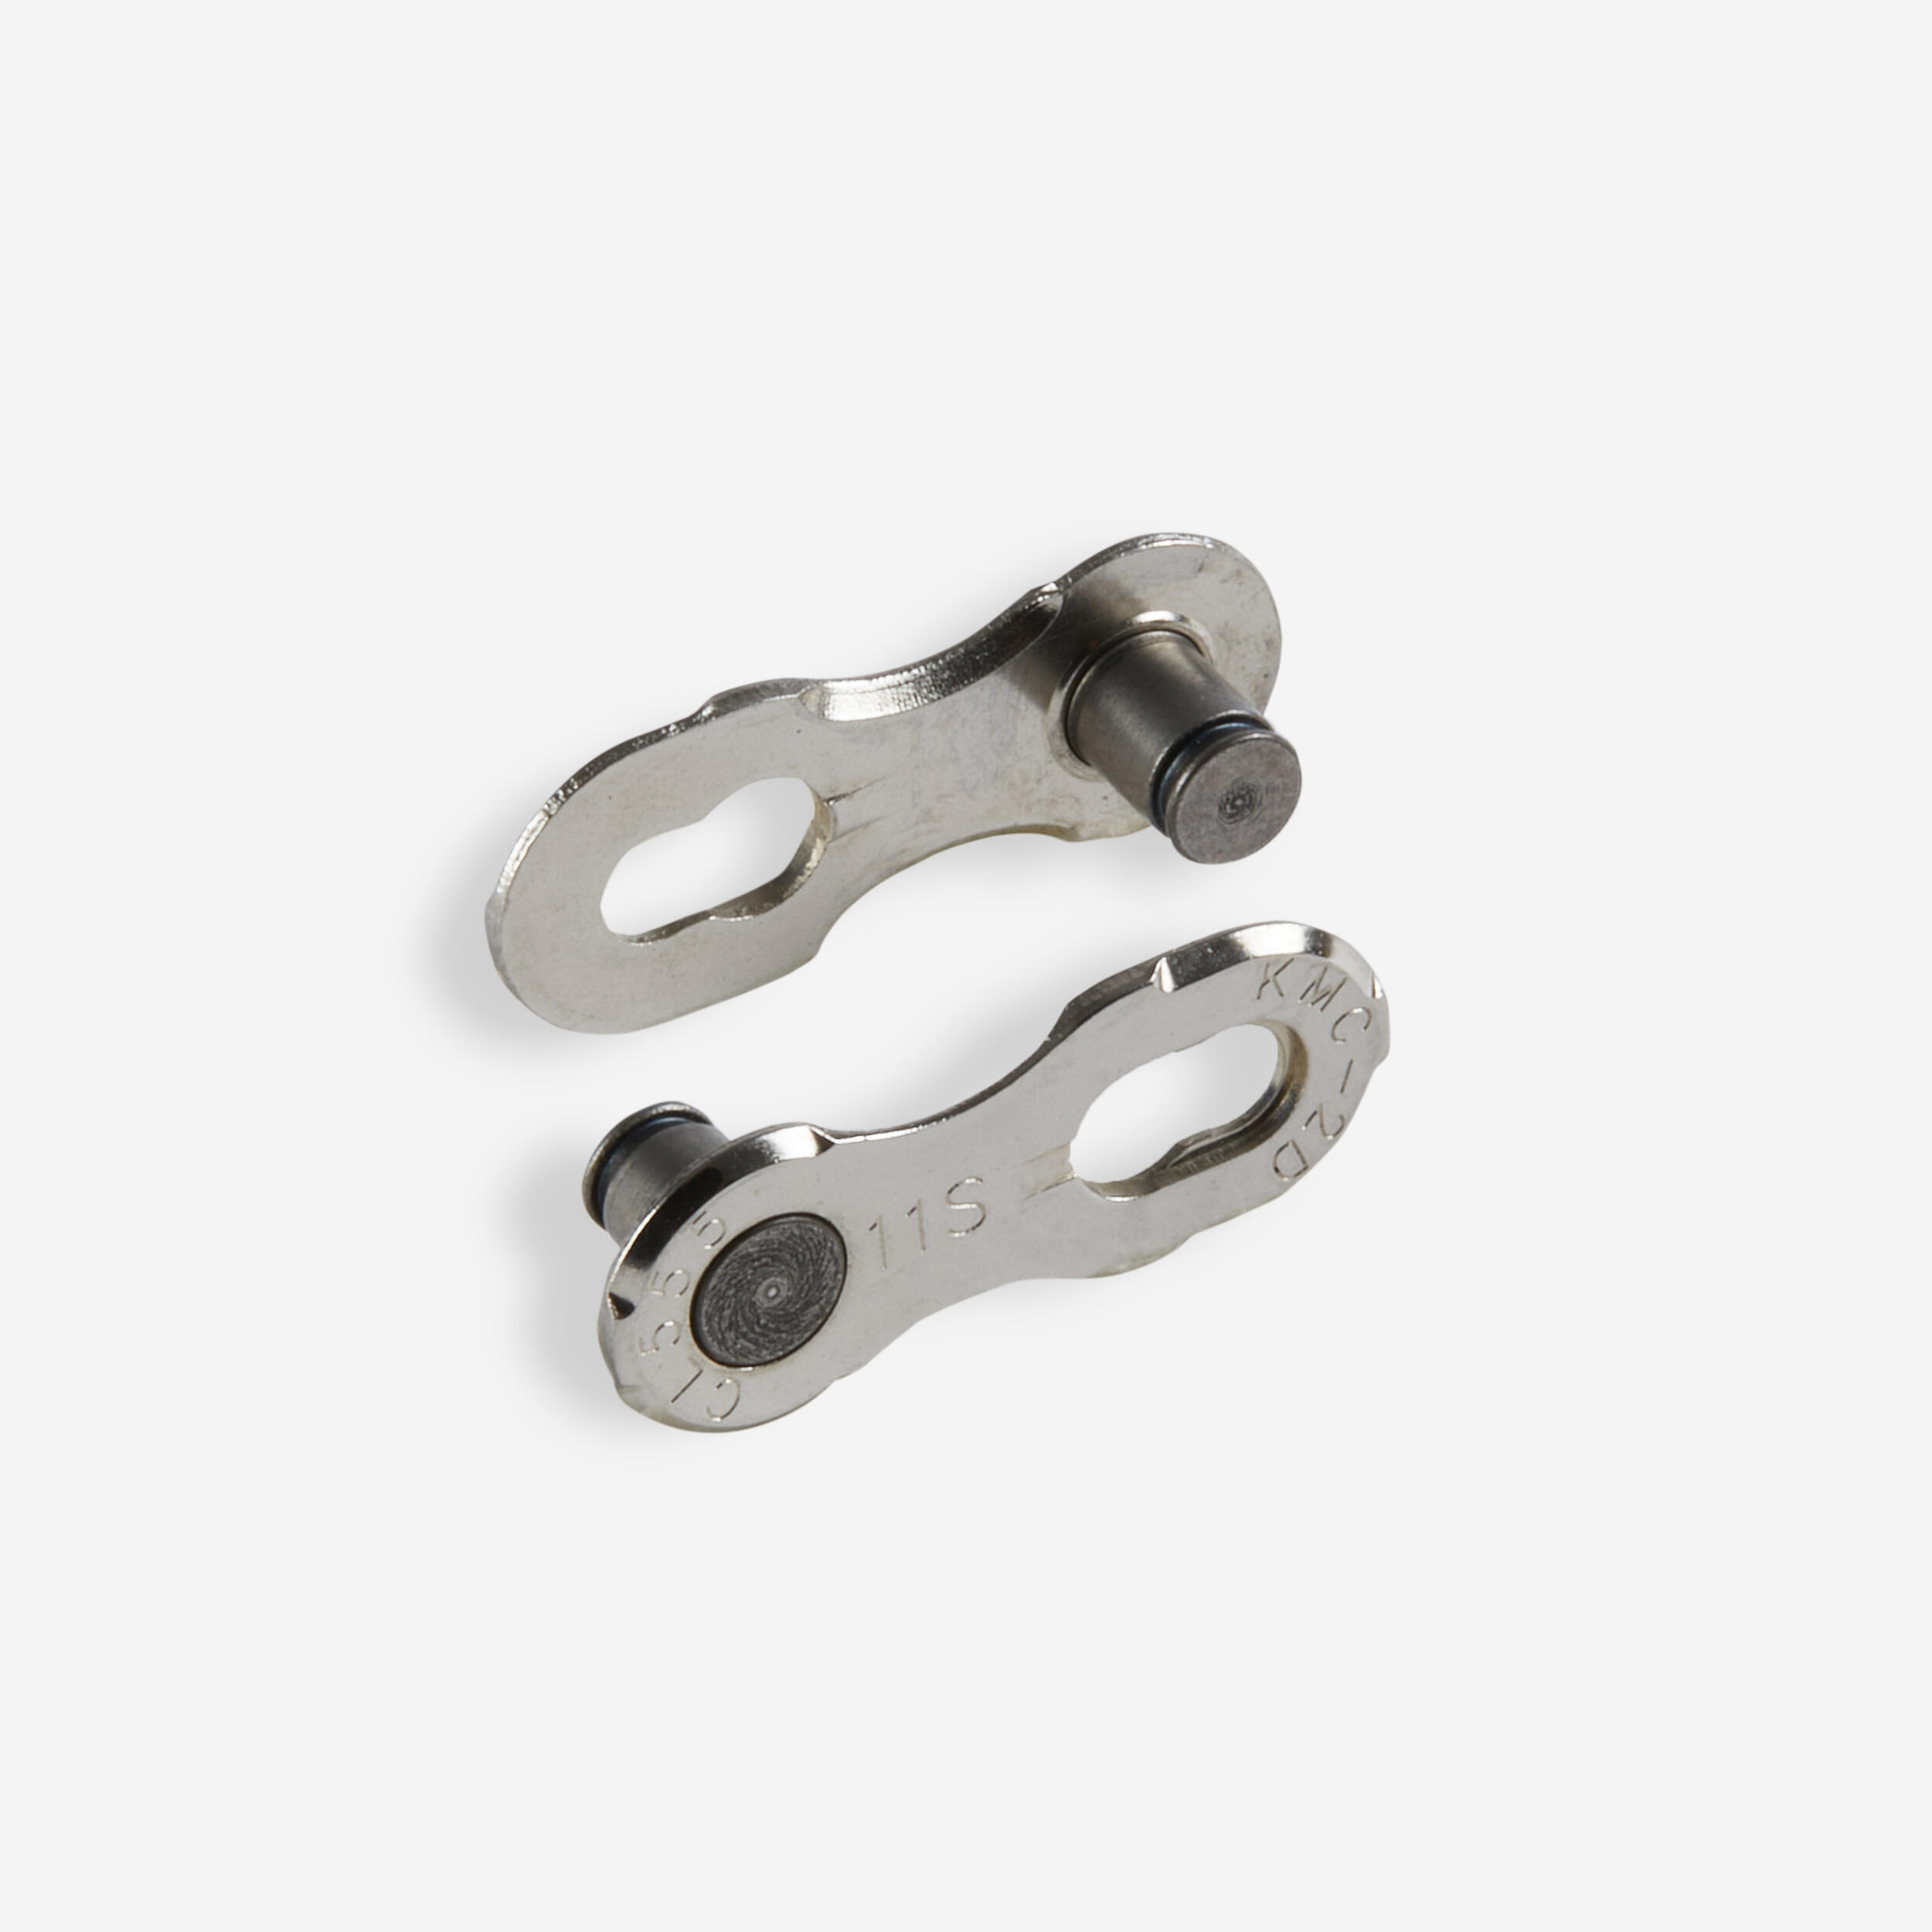 11-Speed Quick Chain Links - Twin Pack